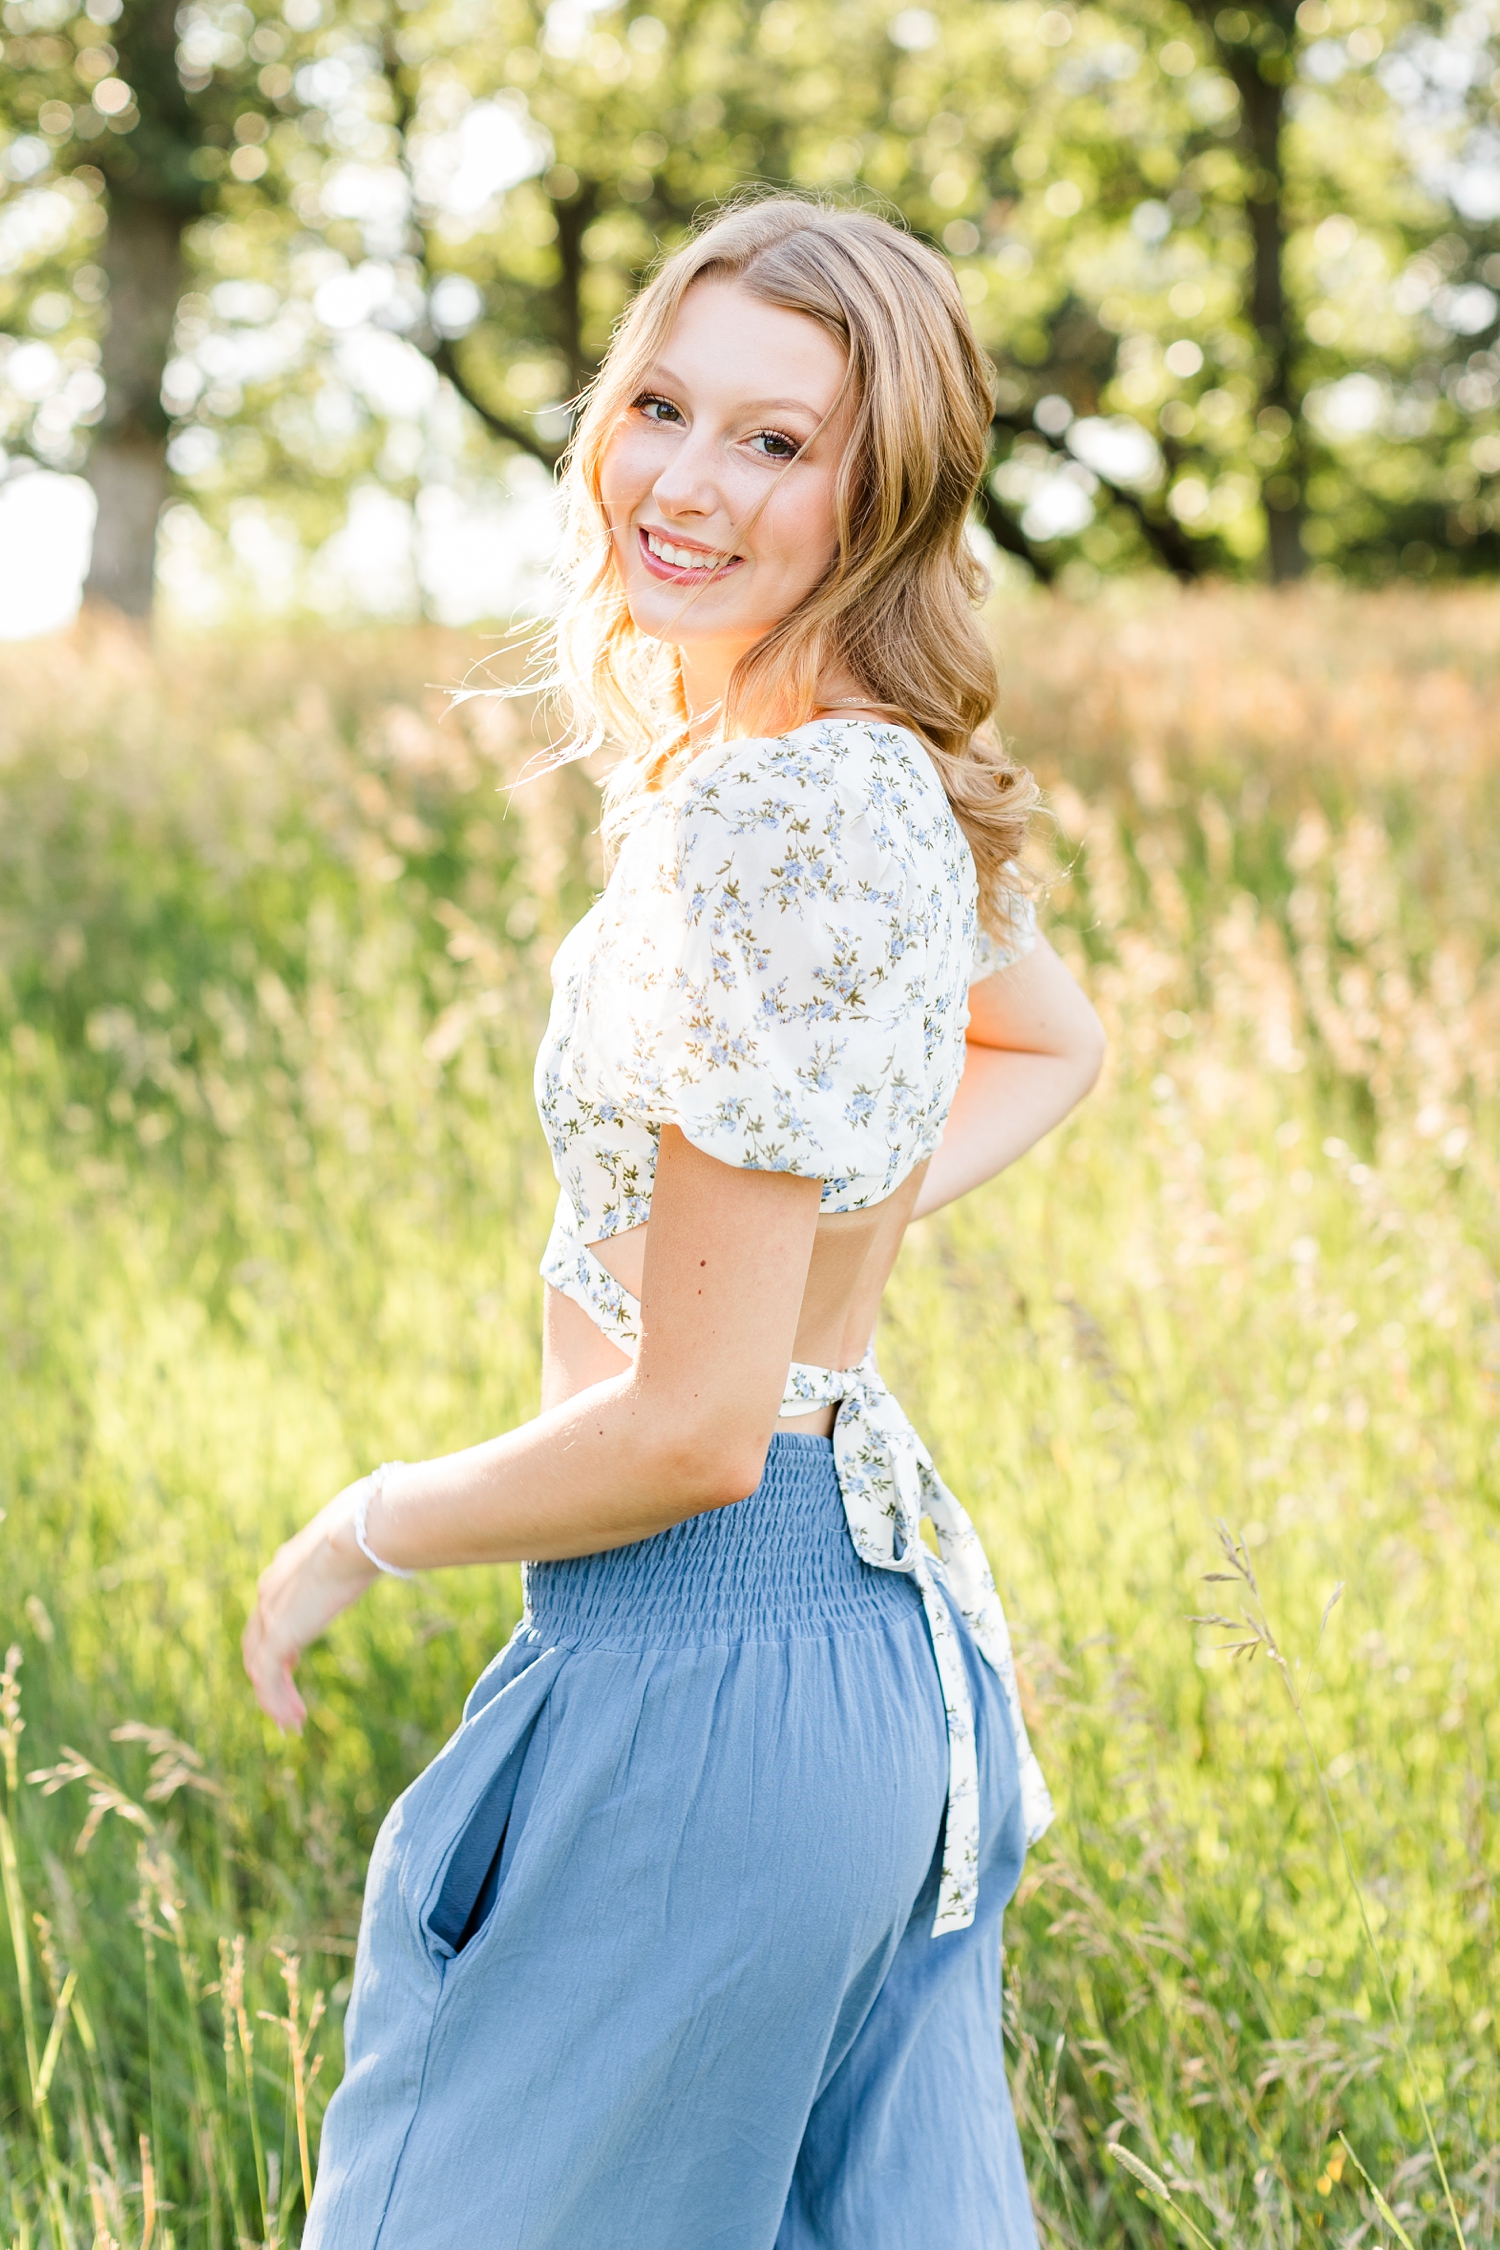 Ryley smiles in a grassy pasture as the wind blows through her hair | CB Studio